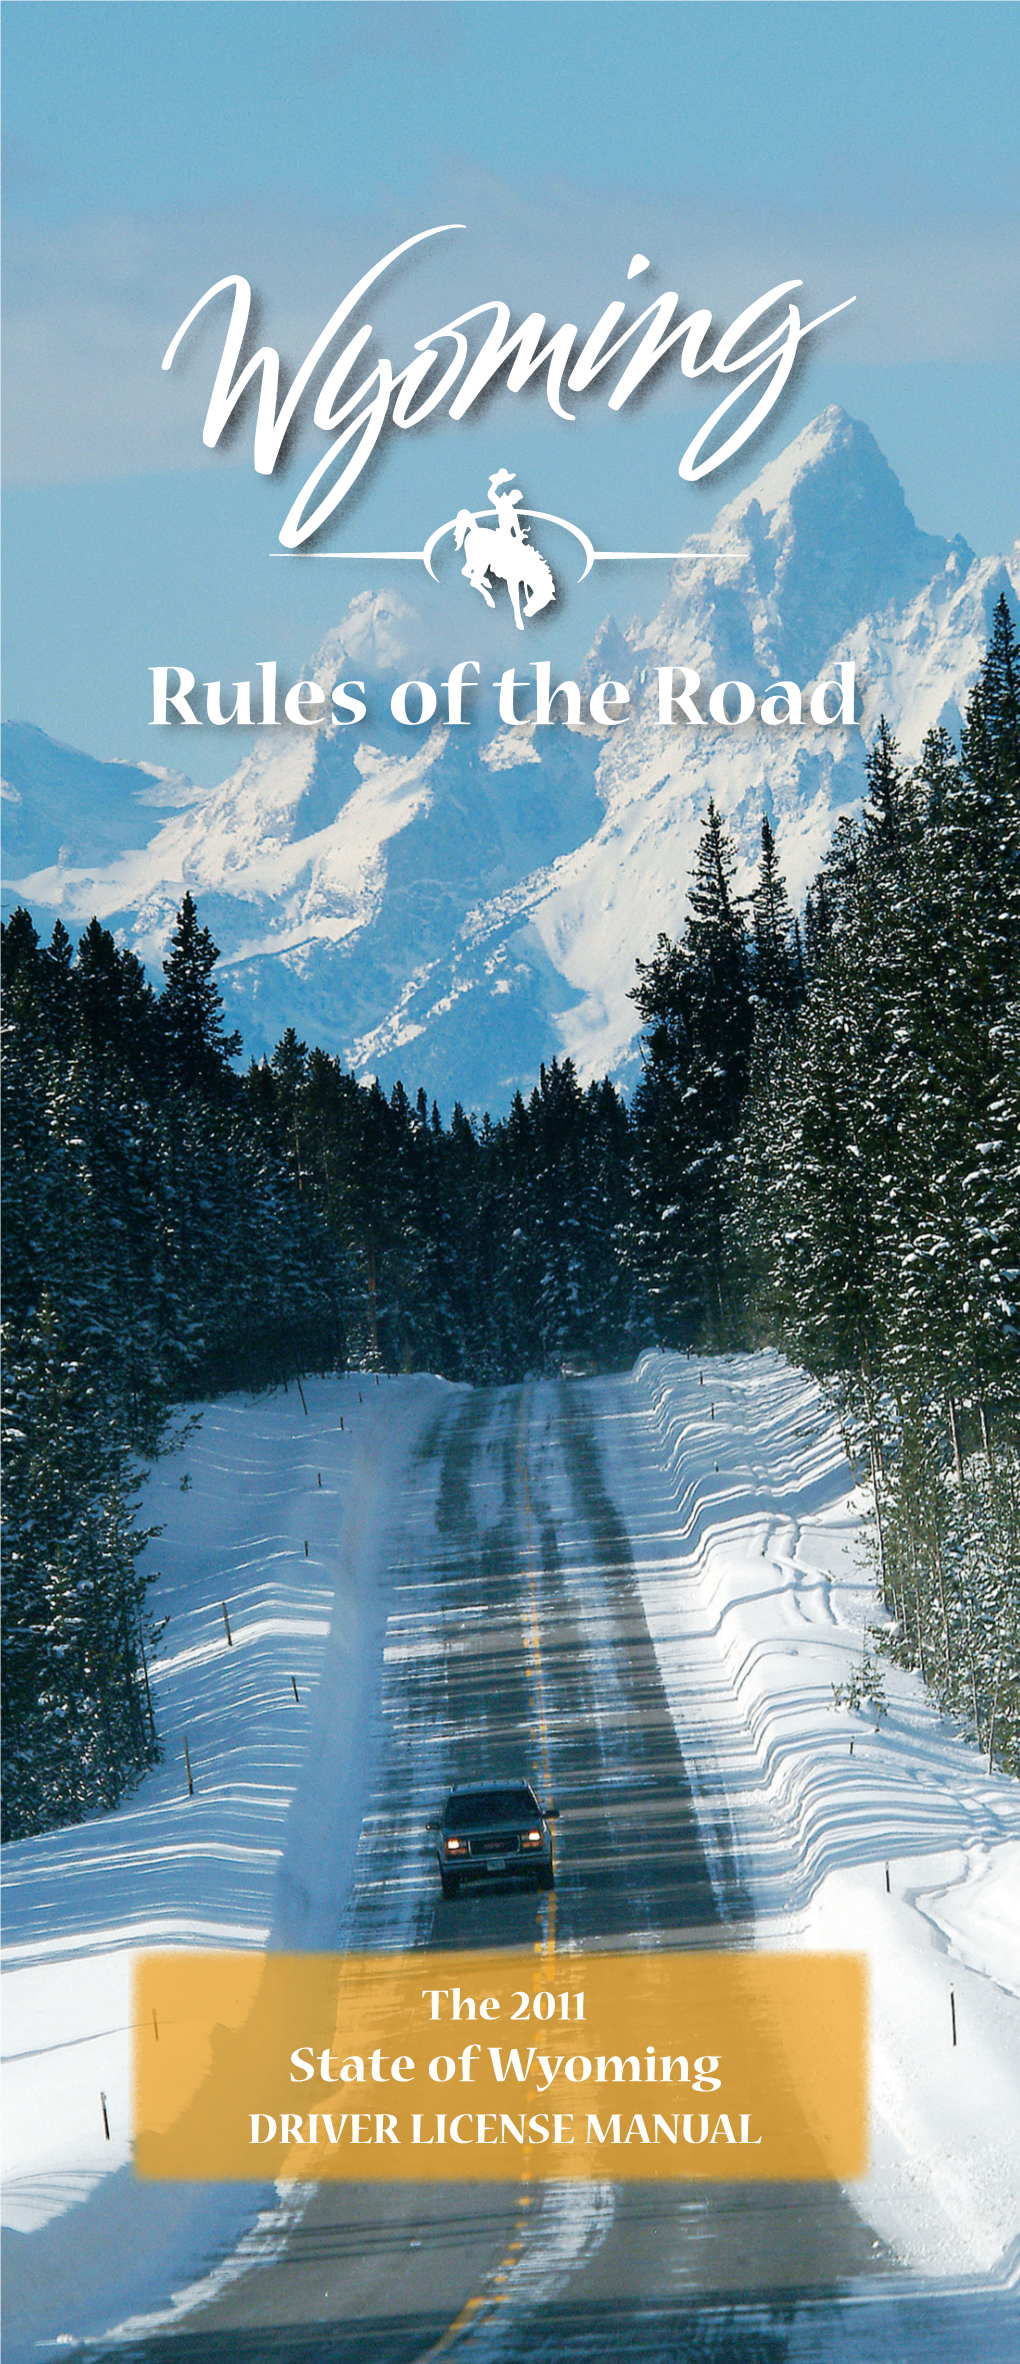 State of Wyoming's Rules of the Road (PDF)